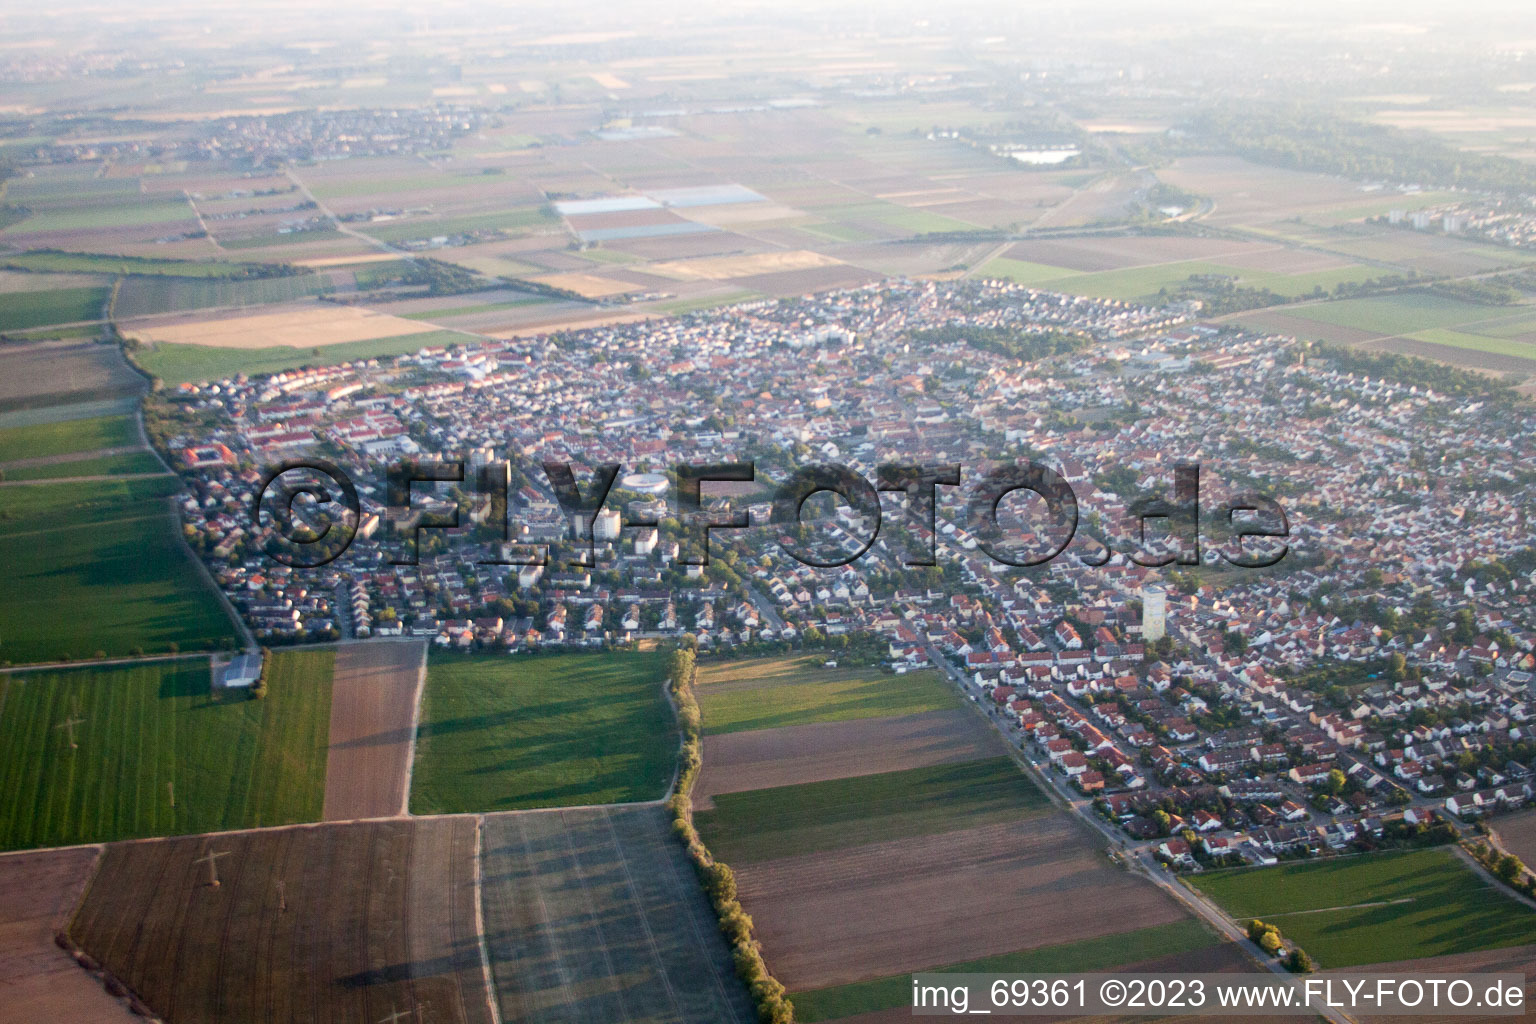 Drone image of Mutterstadt in the state Rhineland-Palatinate, Germany